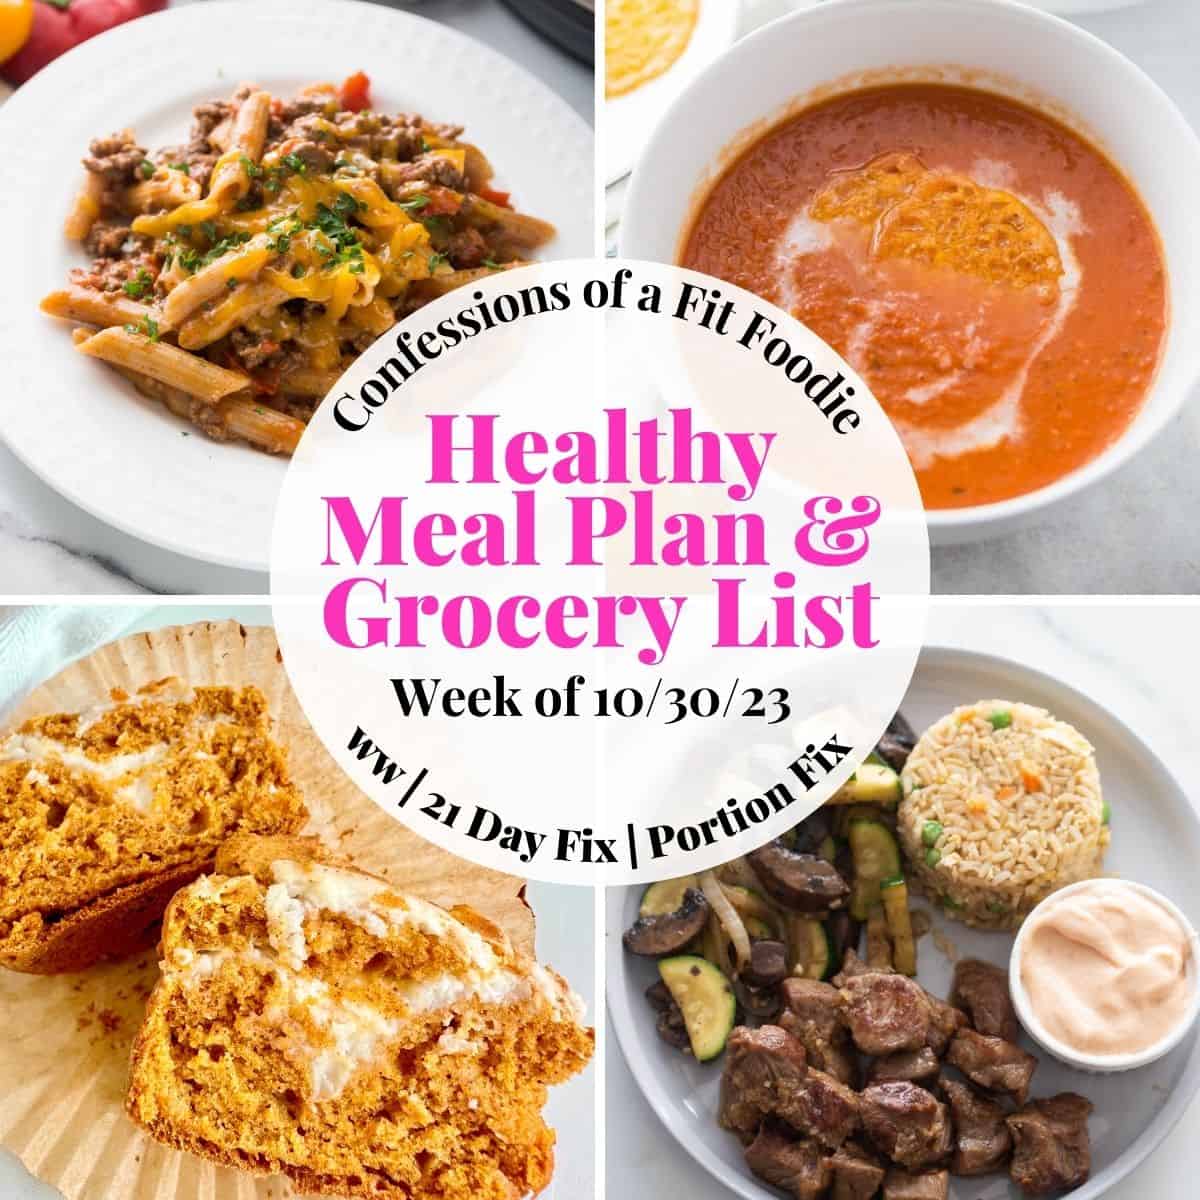 Updated 21 Day Fix Food List - Free Printable - Confessions of a Fit Foodie